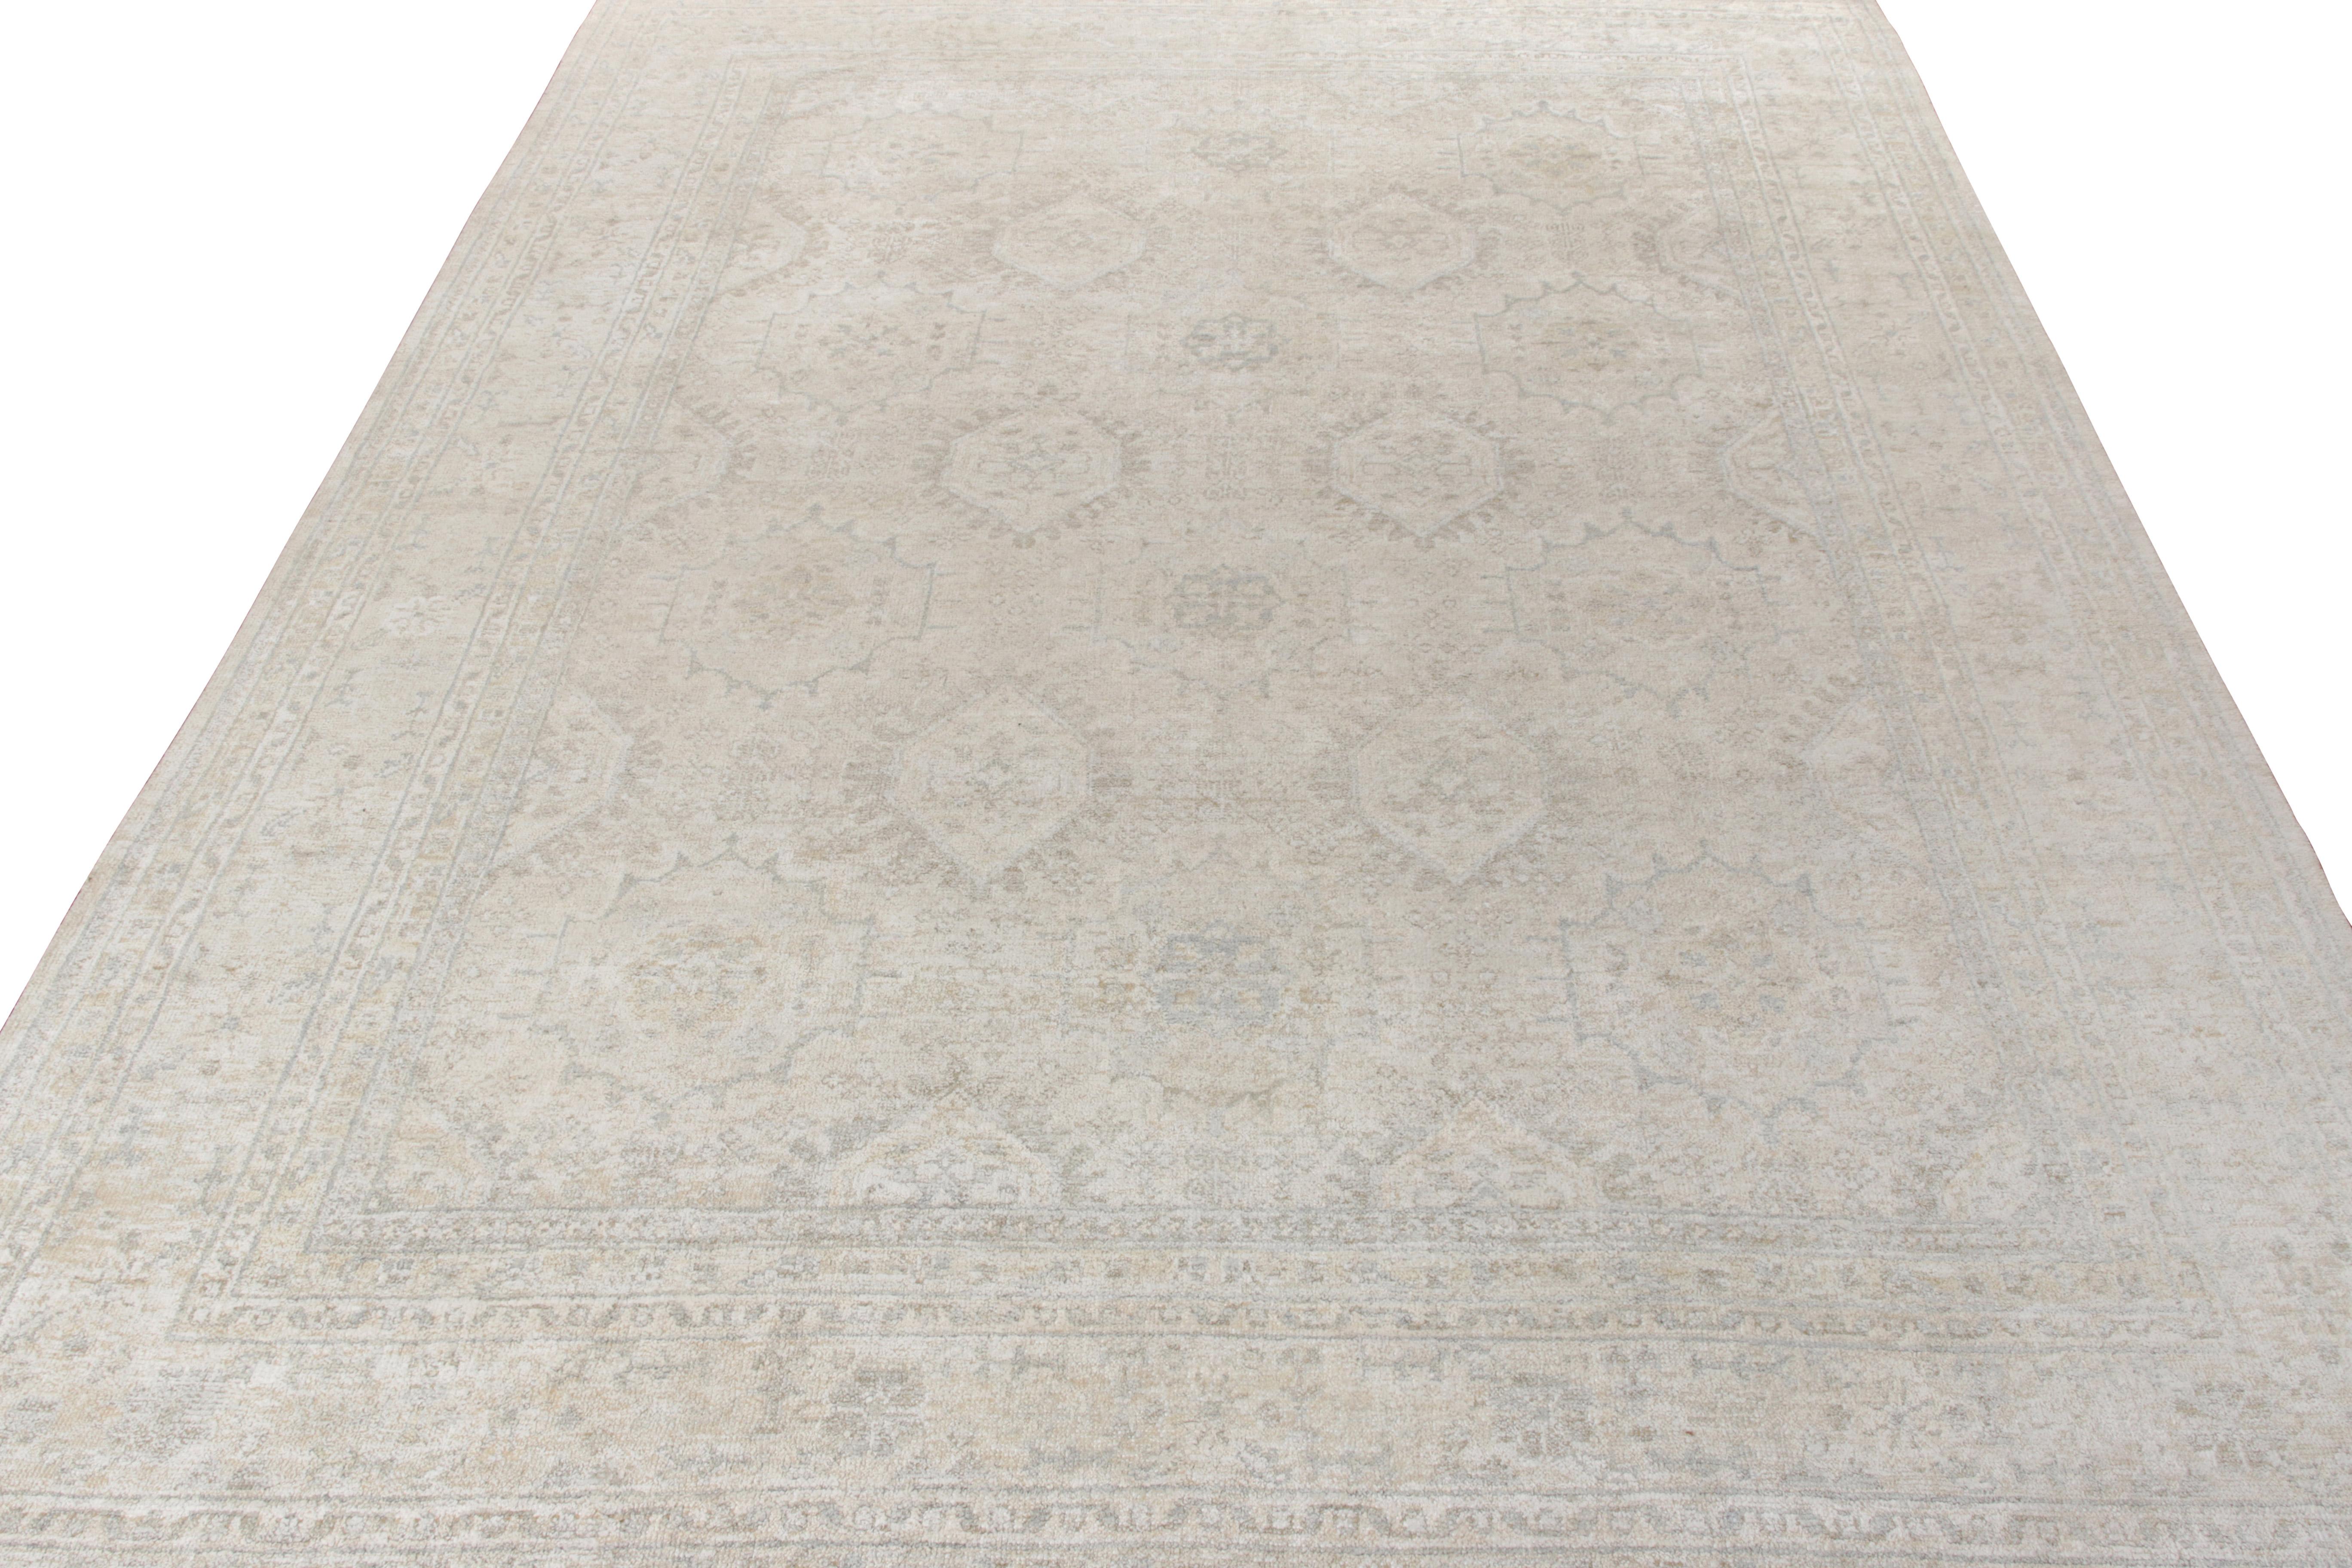 Hand knotted in wool & silk, an Indian style custom rug from Rug & Kilim’s Modern Classics collection. Exemplified in this 10x14 edition, the rug features an all over geometric-floral pattern in complementary tones of blue and beige-gray with a